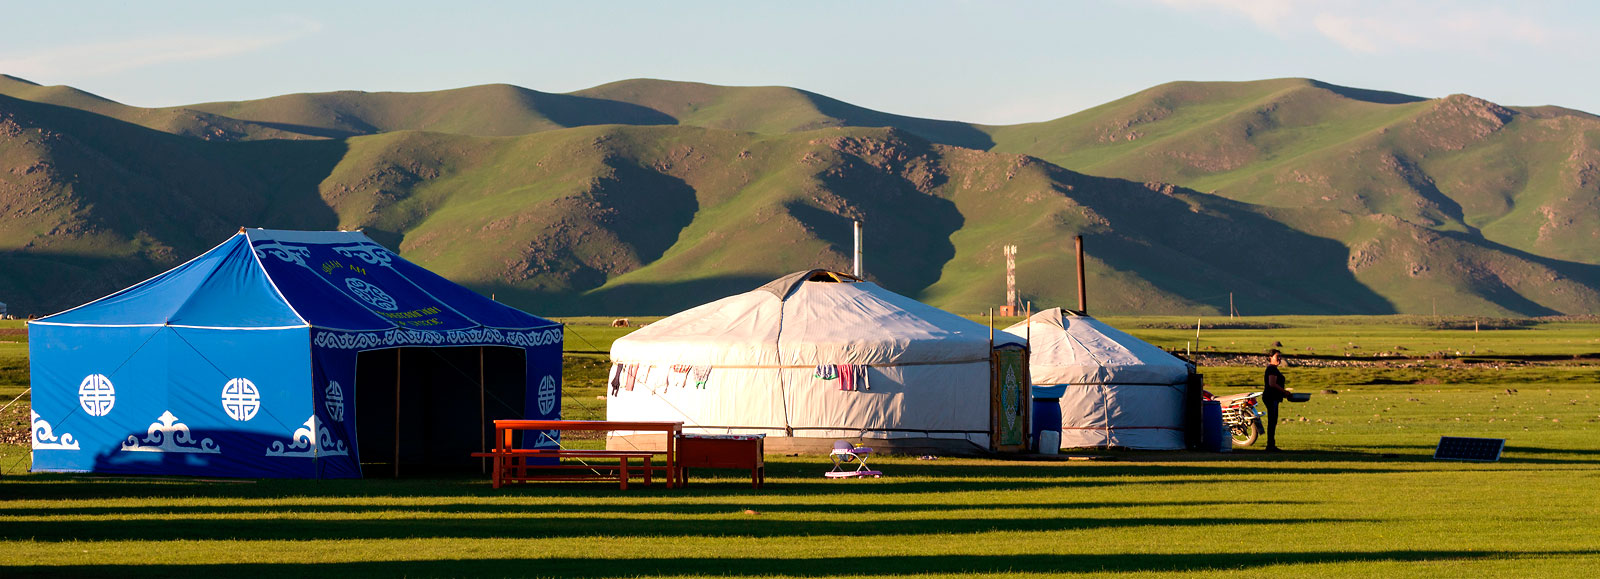 Yurts in the Mongolian steppe